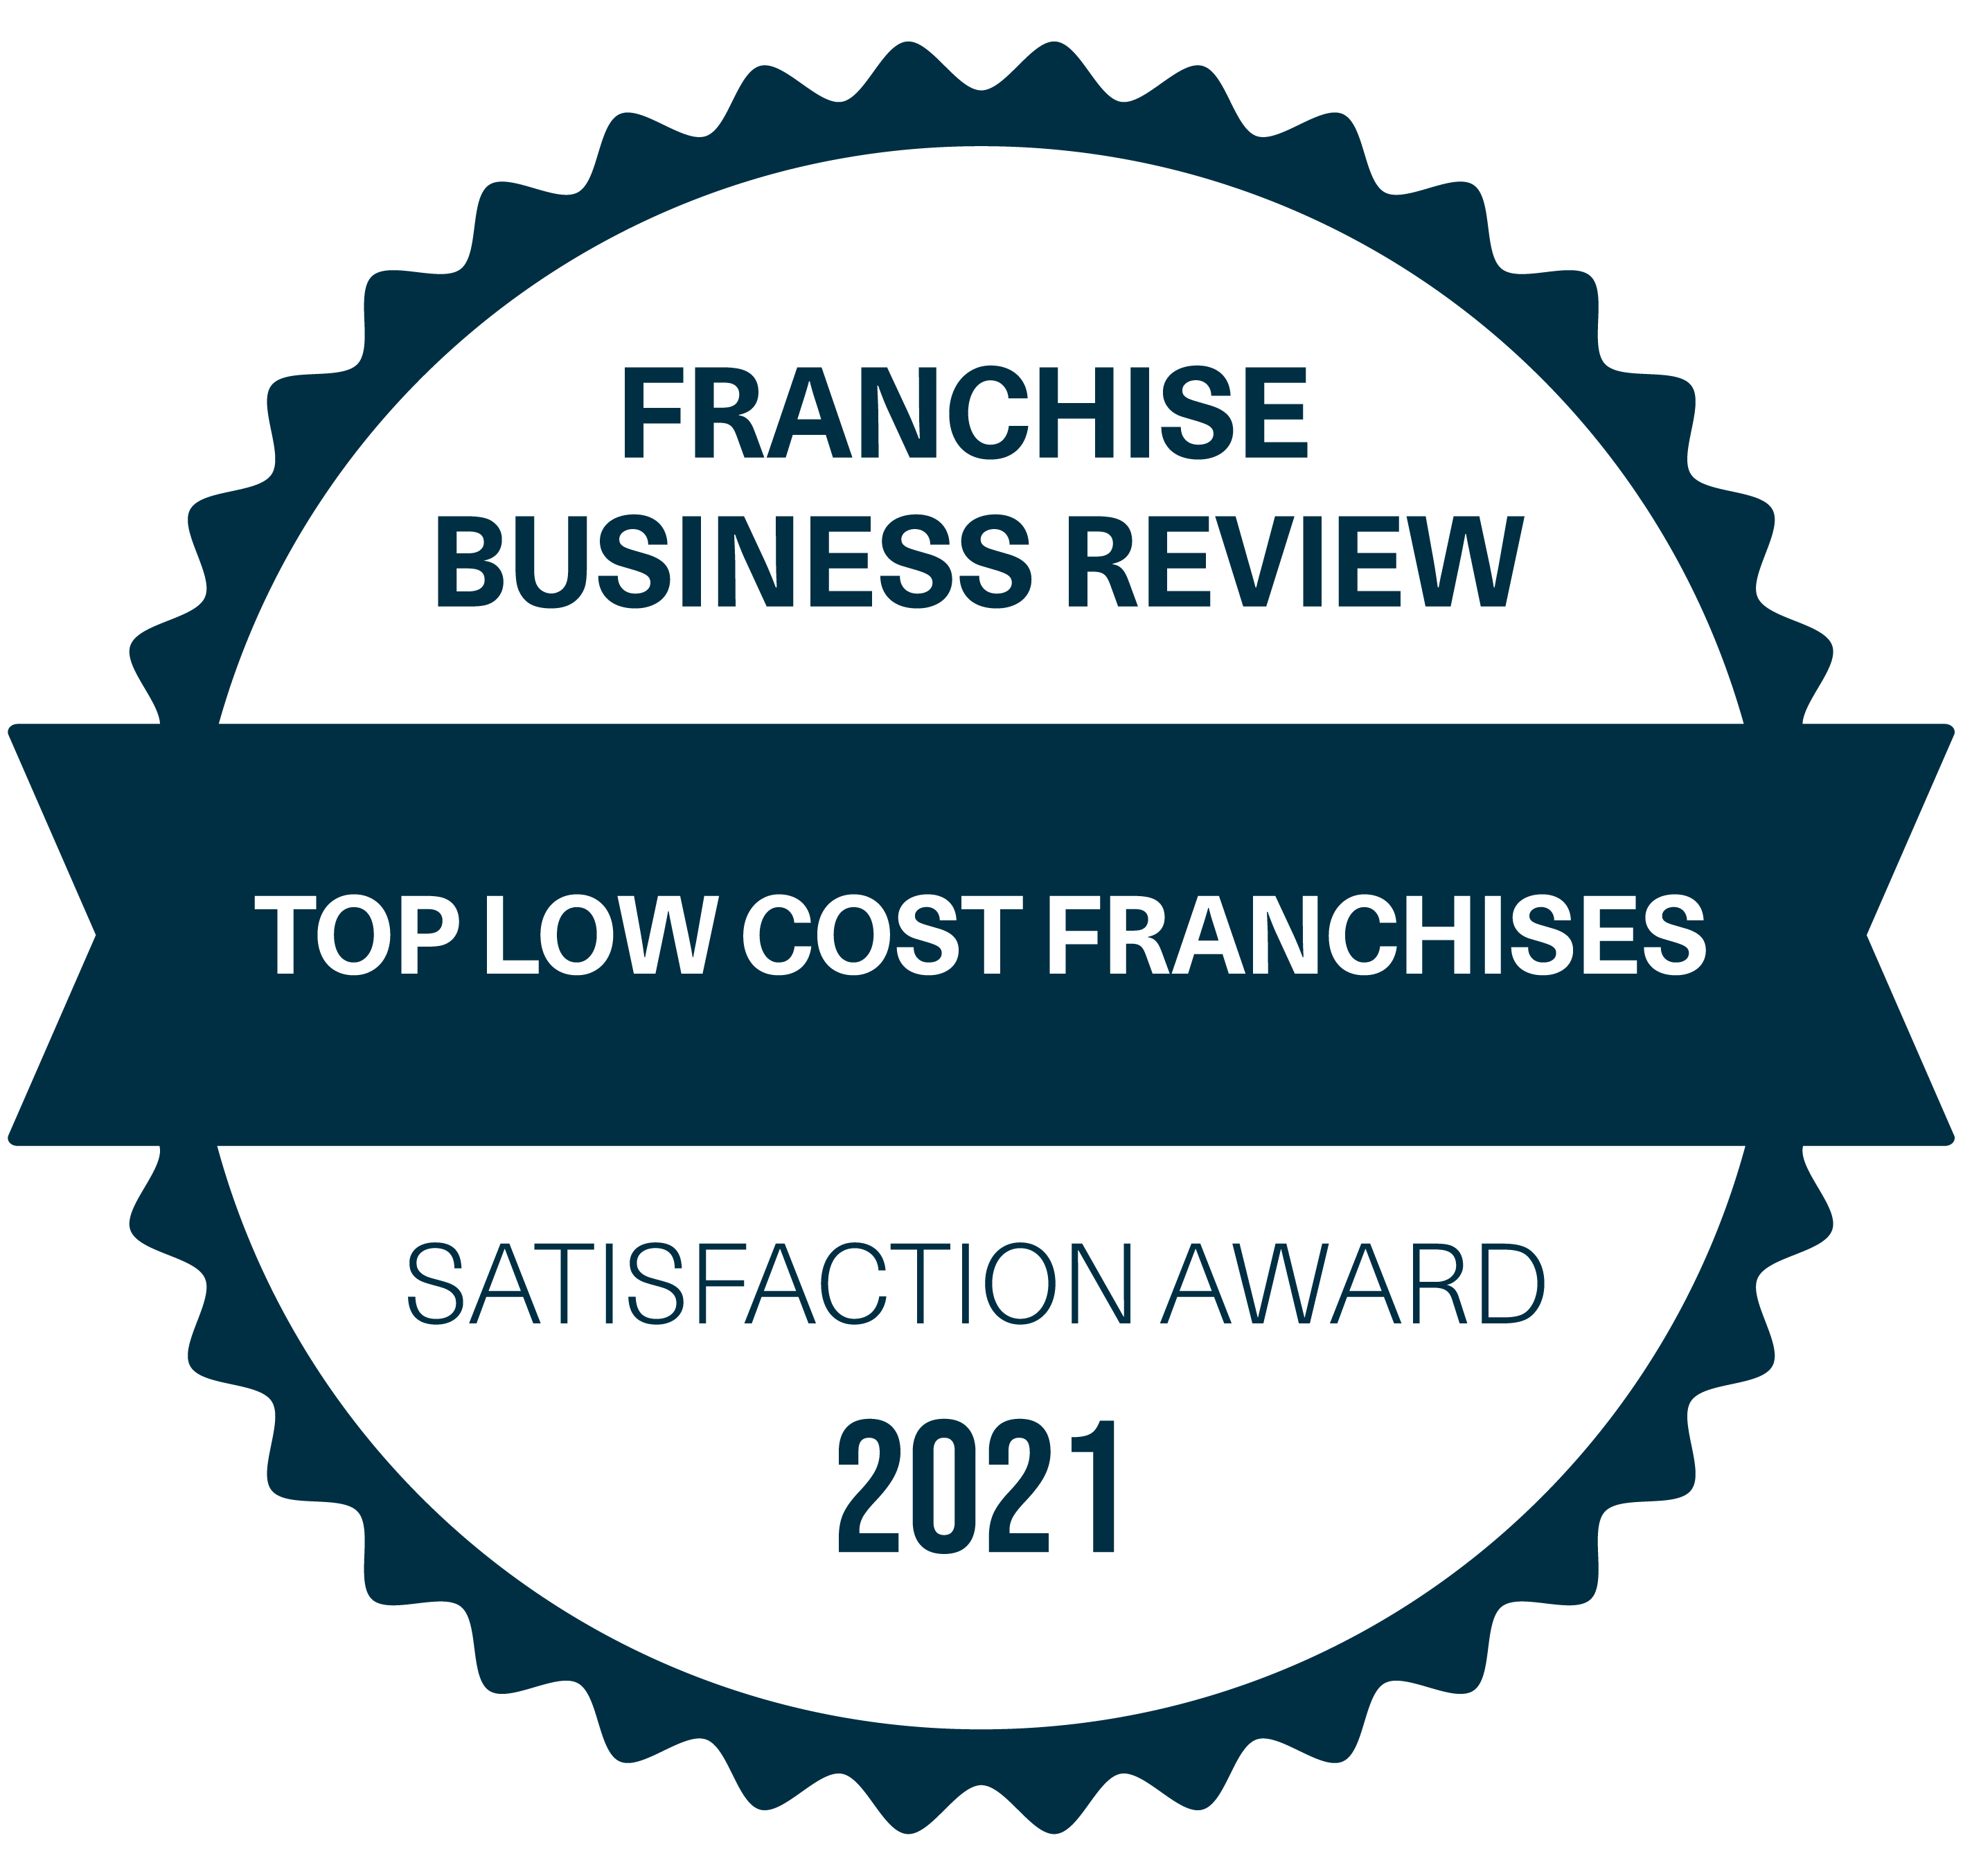 Top Low Cost Franchises 2021 Satisfaction Award from Franchise Business Review badge